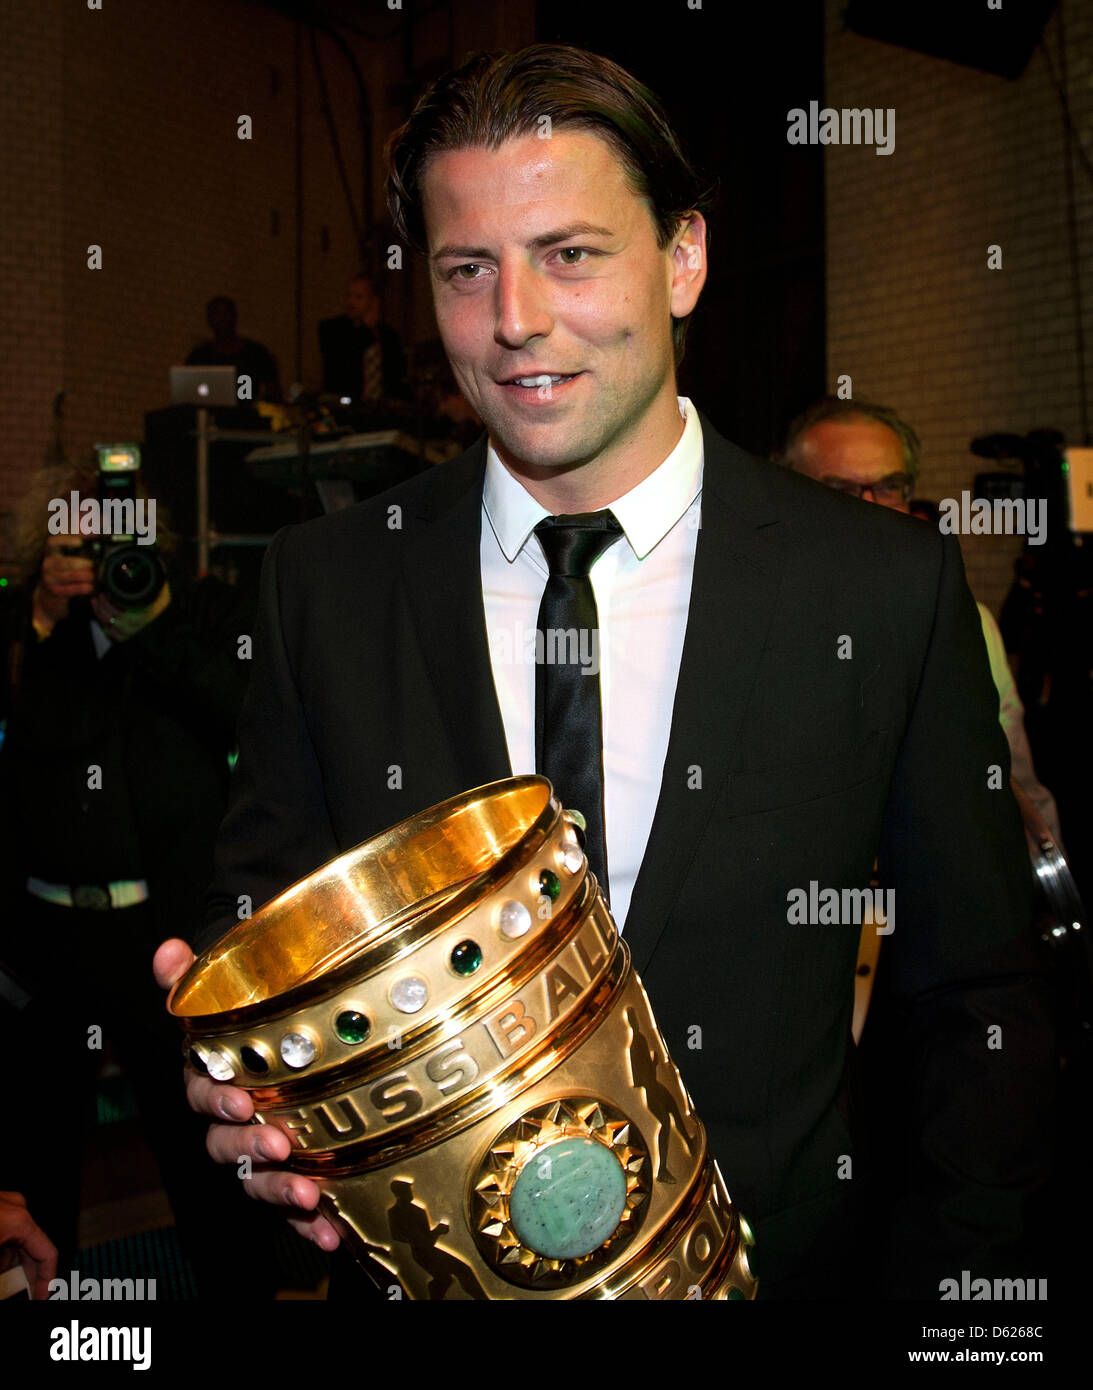 Goal keeper of Bundesliga soccer club Borussia Dortmund Roman Weidenfeller poses with the DFB Cup trophy during Dortmund's victory celebration in Berlin, Germany, 13 May 2012. Dortmund has for the first time in its 103 years of club history managed to gain both the German Soccer Championship and the DFB Cup in the same season. Photo: Timur Emek Stock Photo